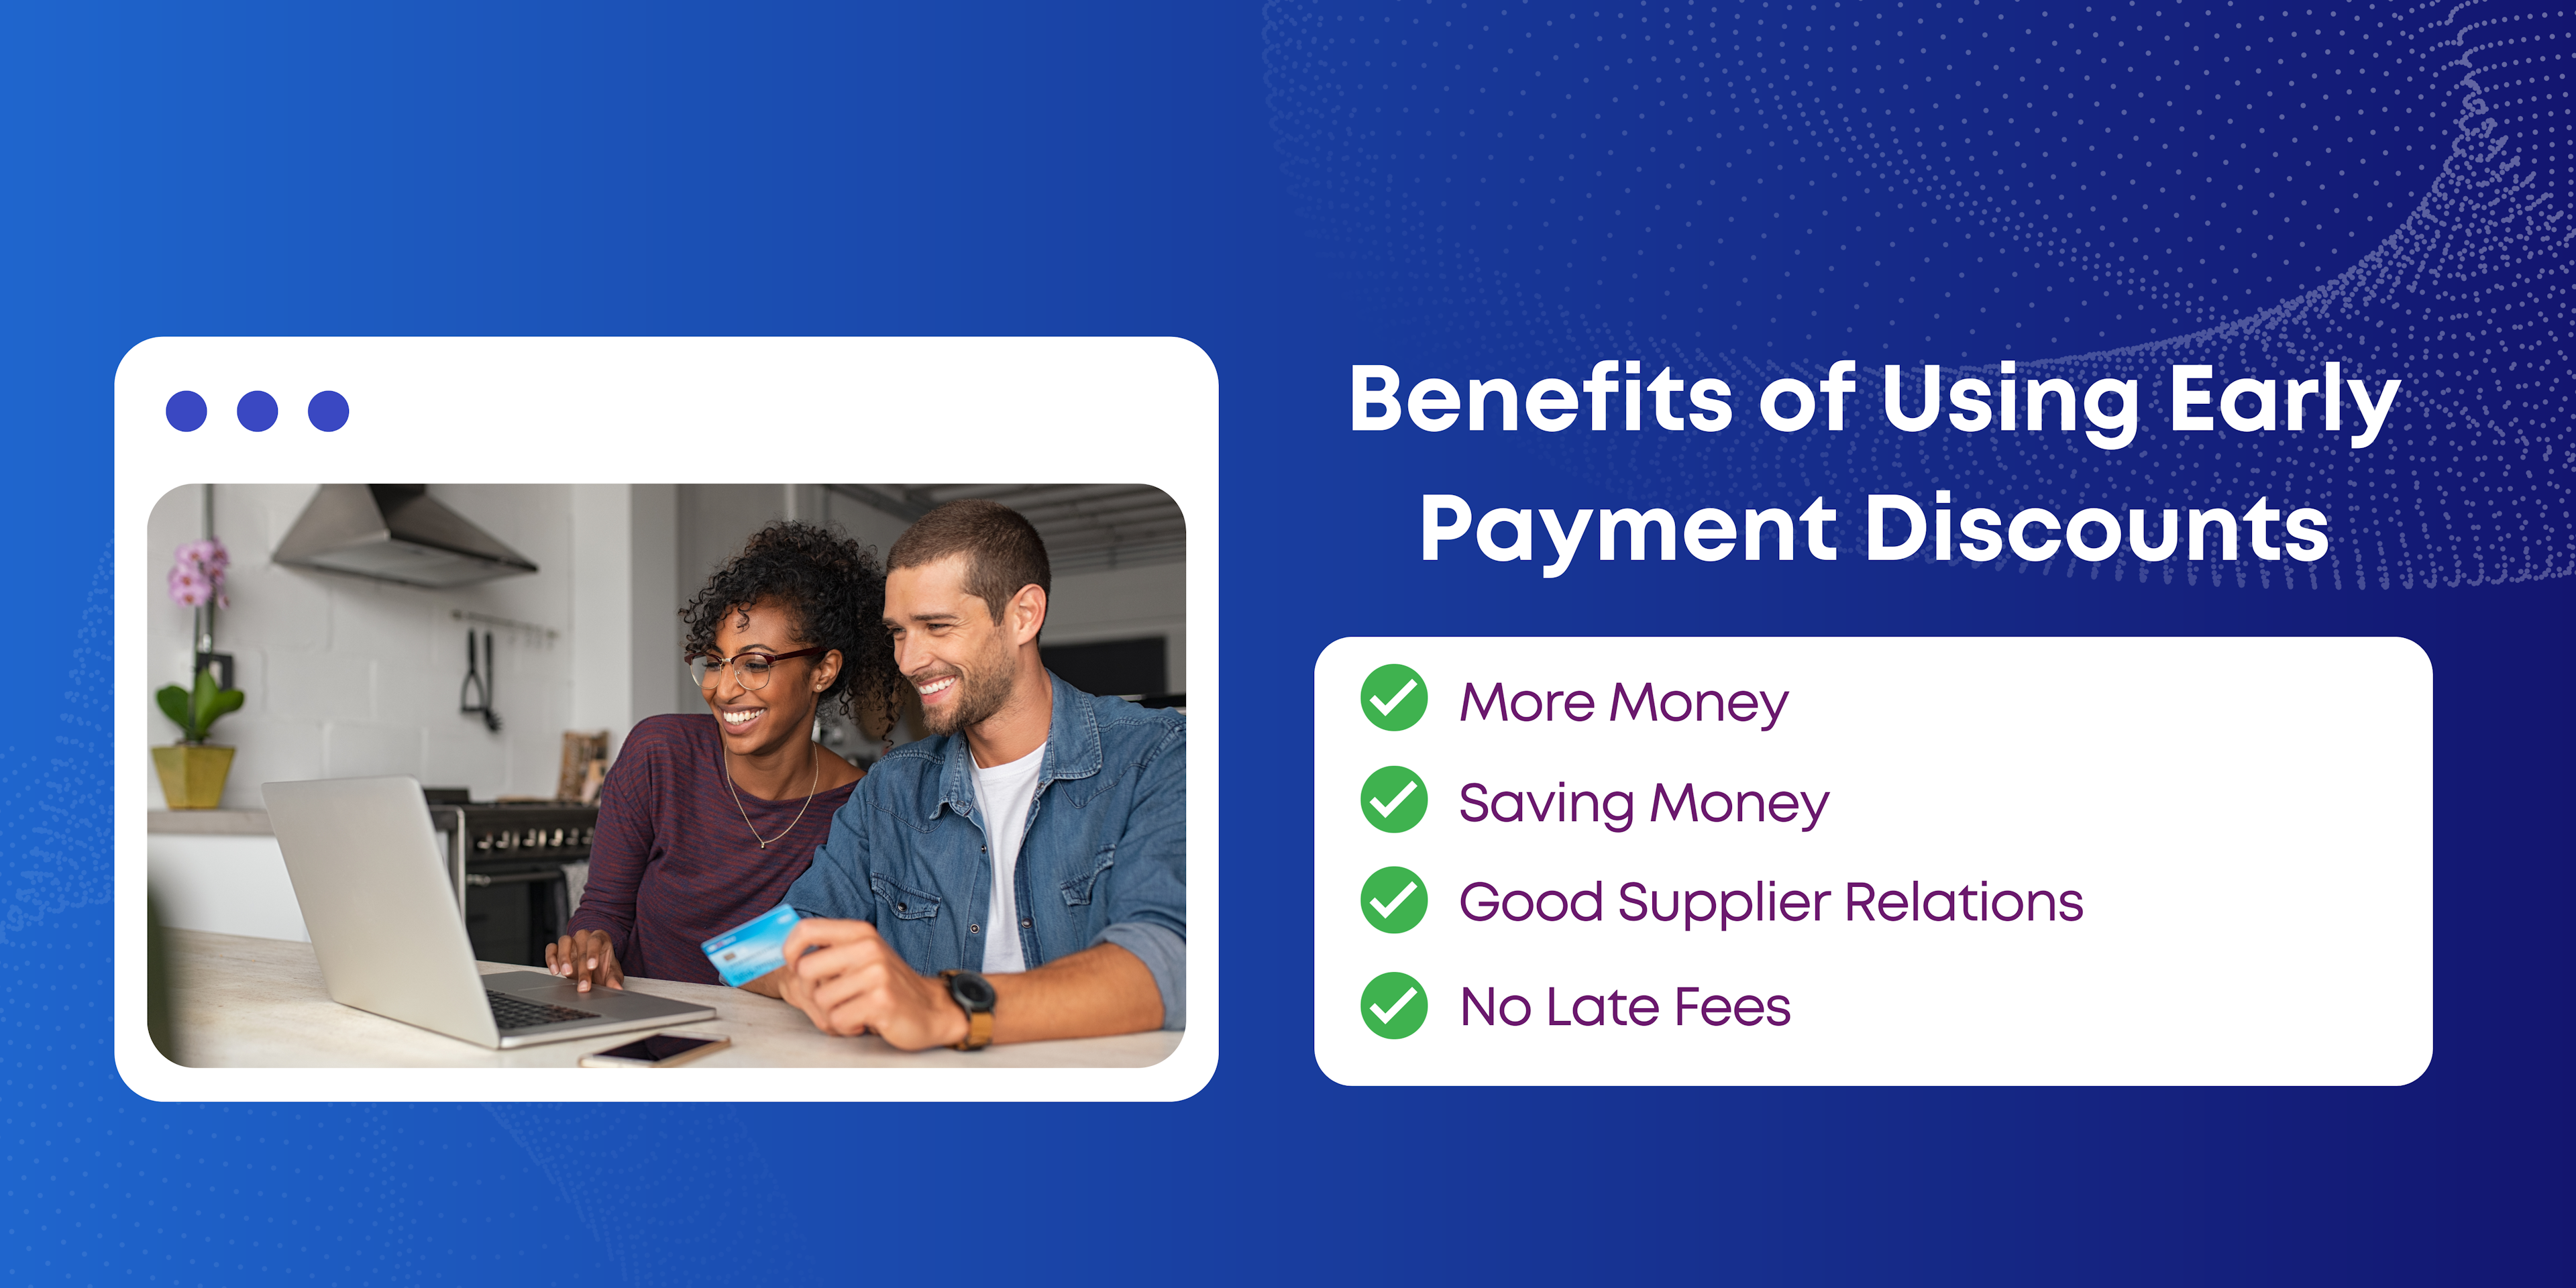 Benefits of Using Early Payment Discounts